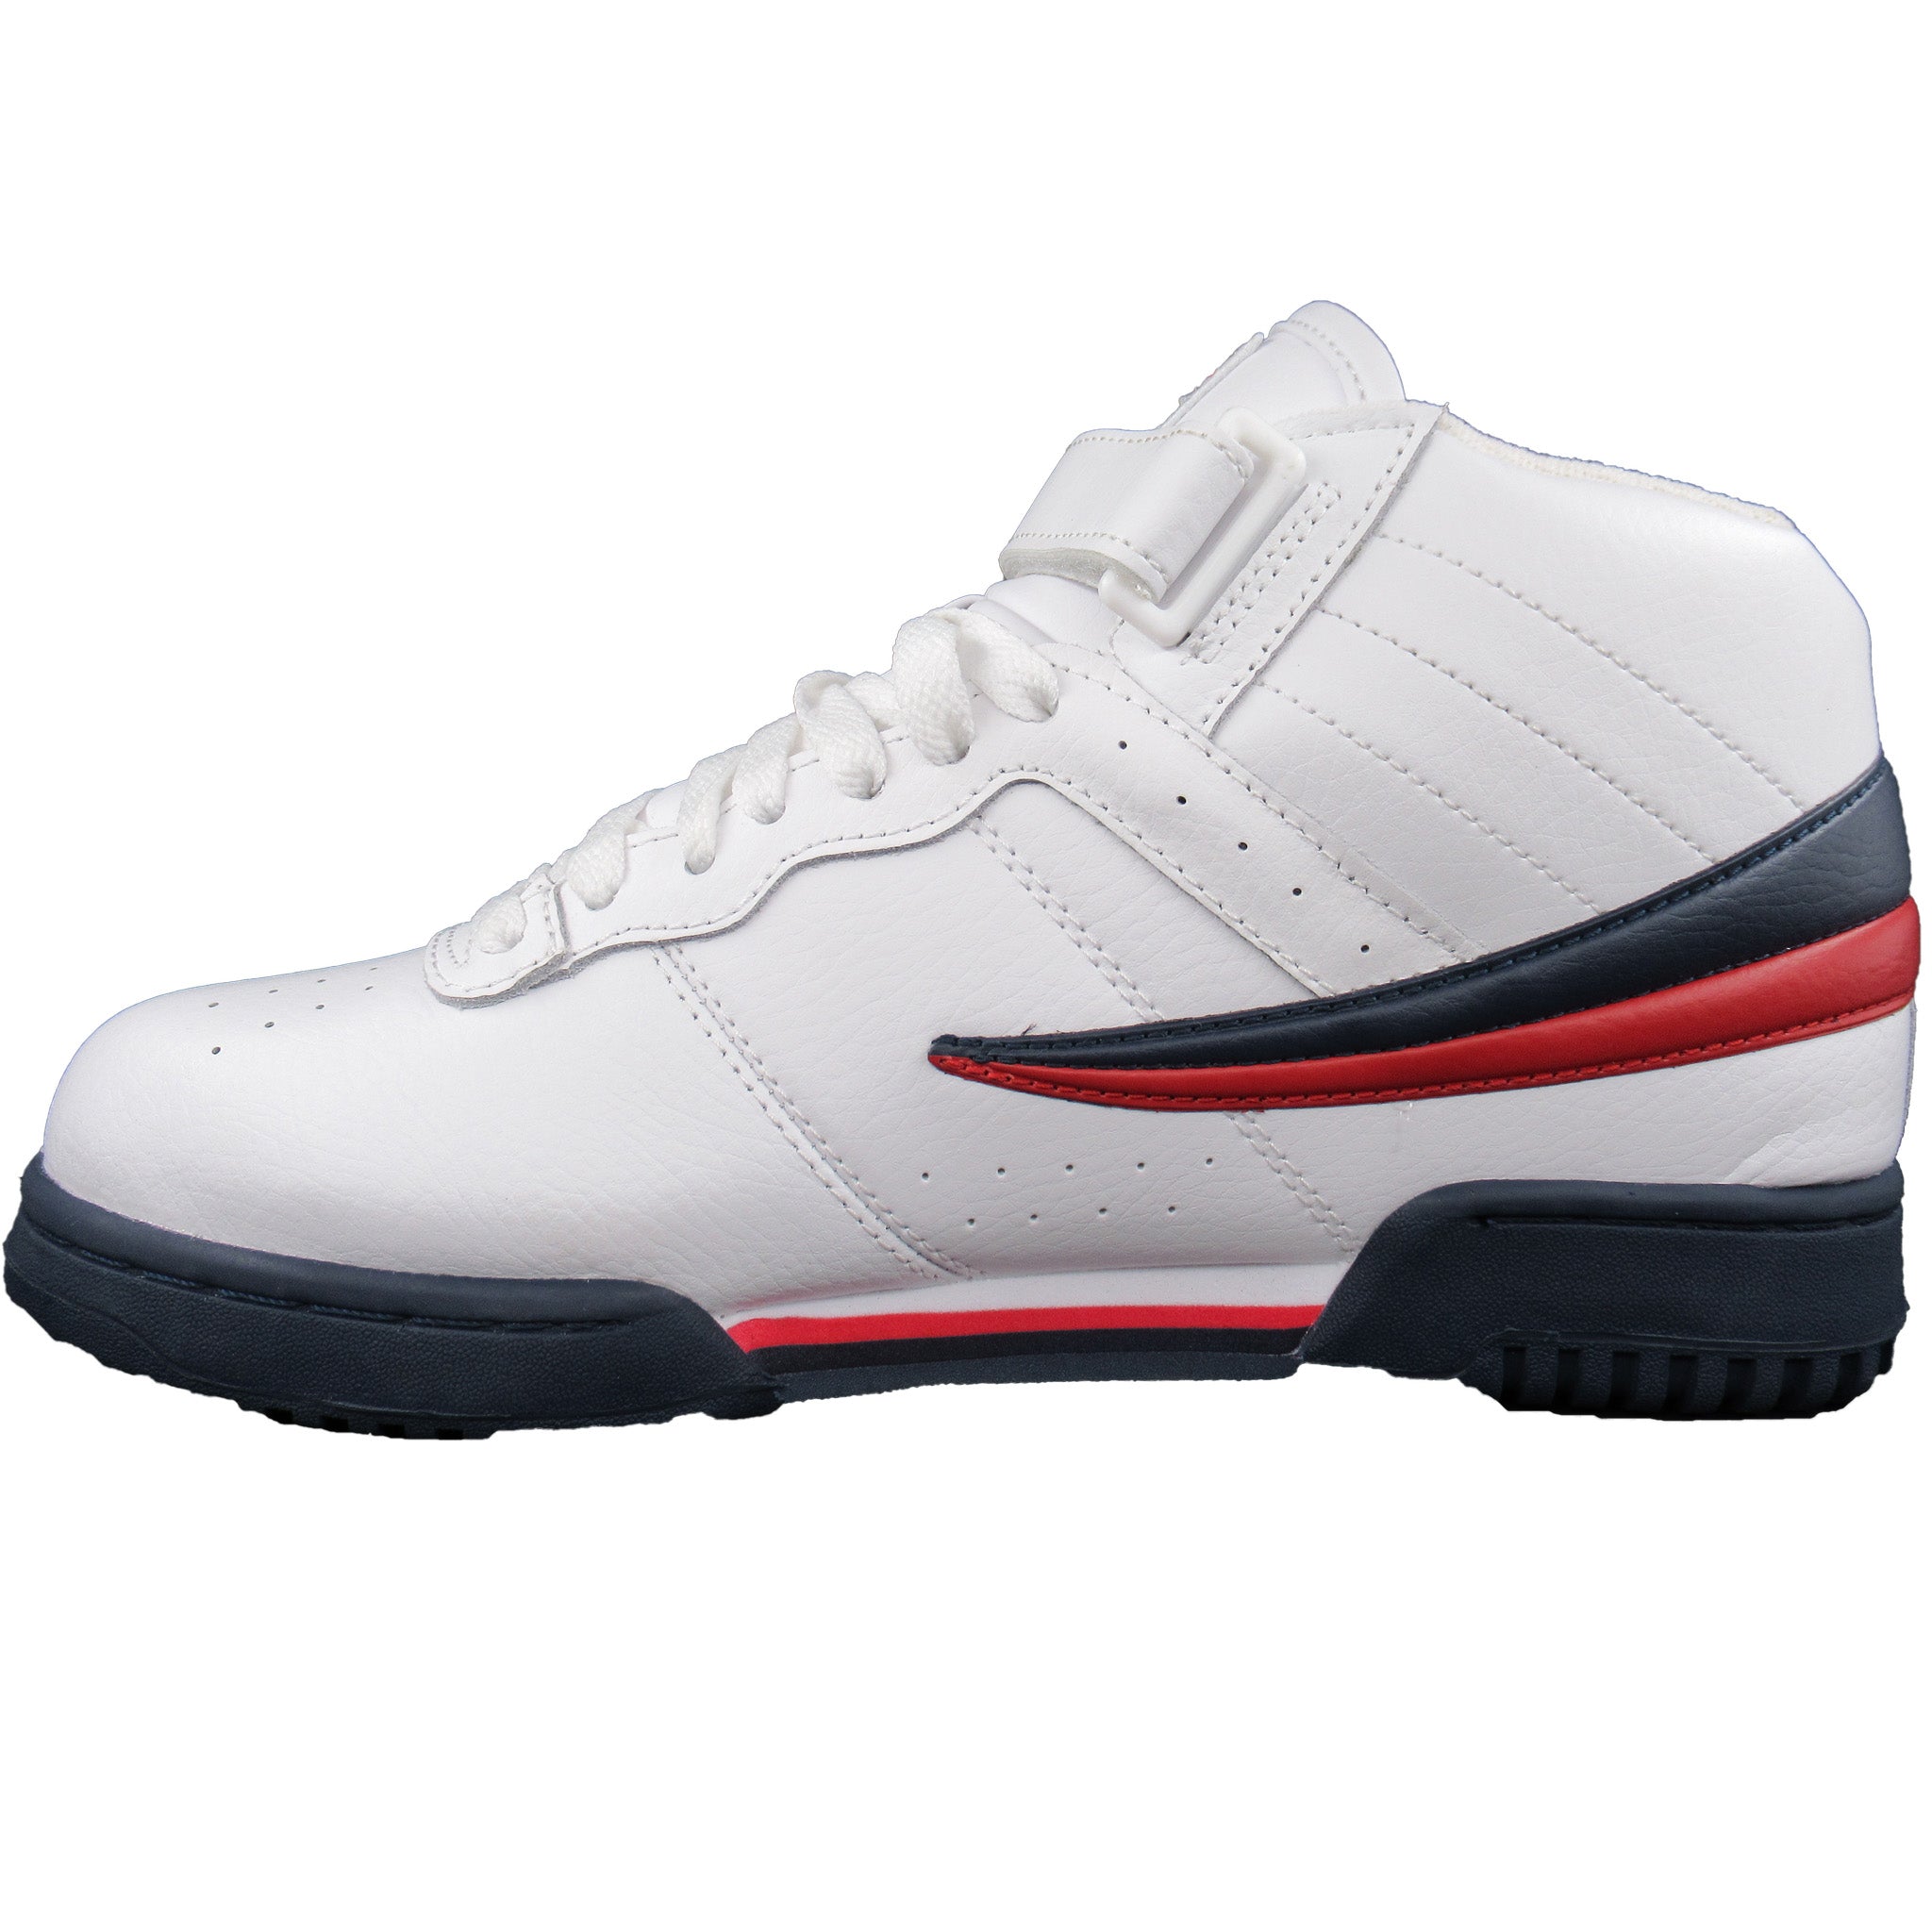 Fila Men's F13 Classic Casual Retro Athletic Shoes – That Shoe Store and More